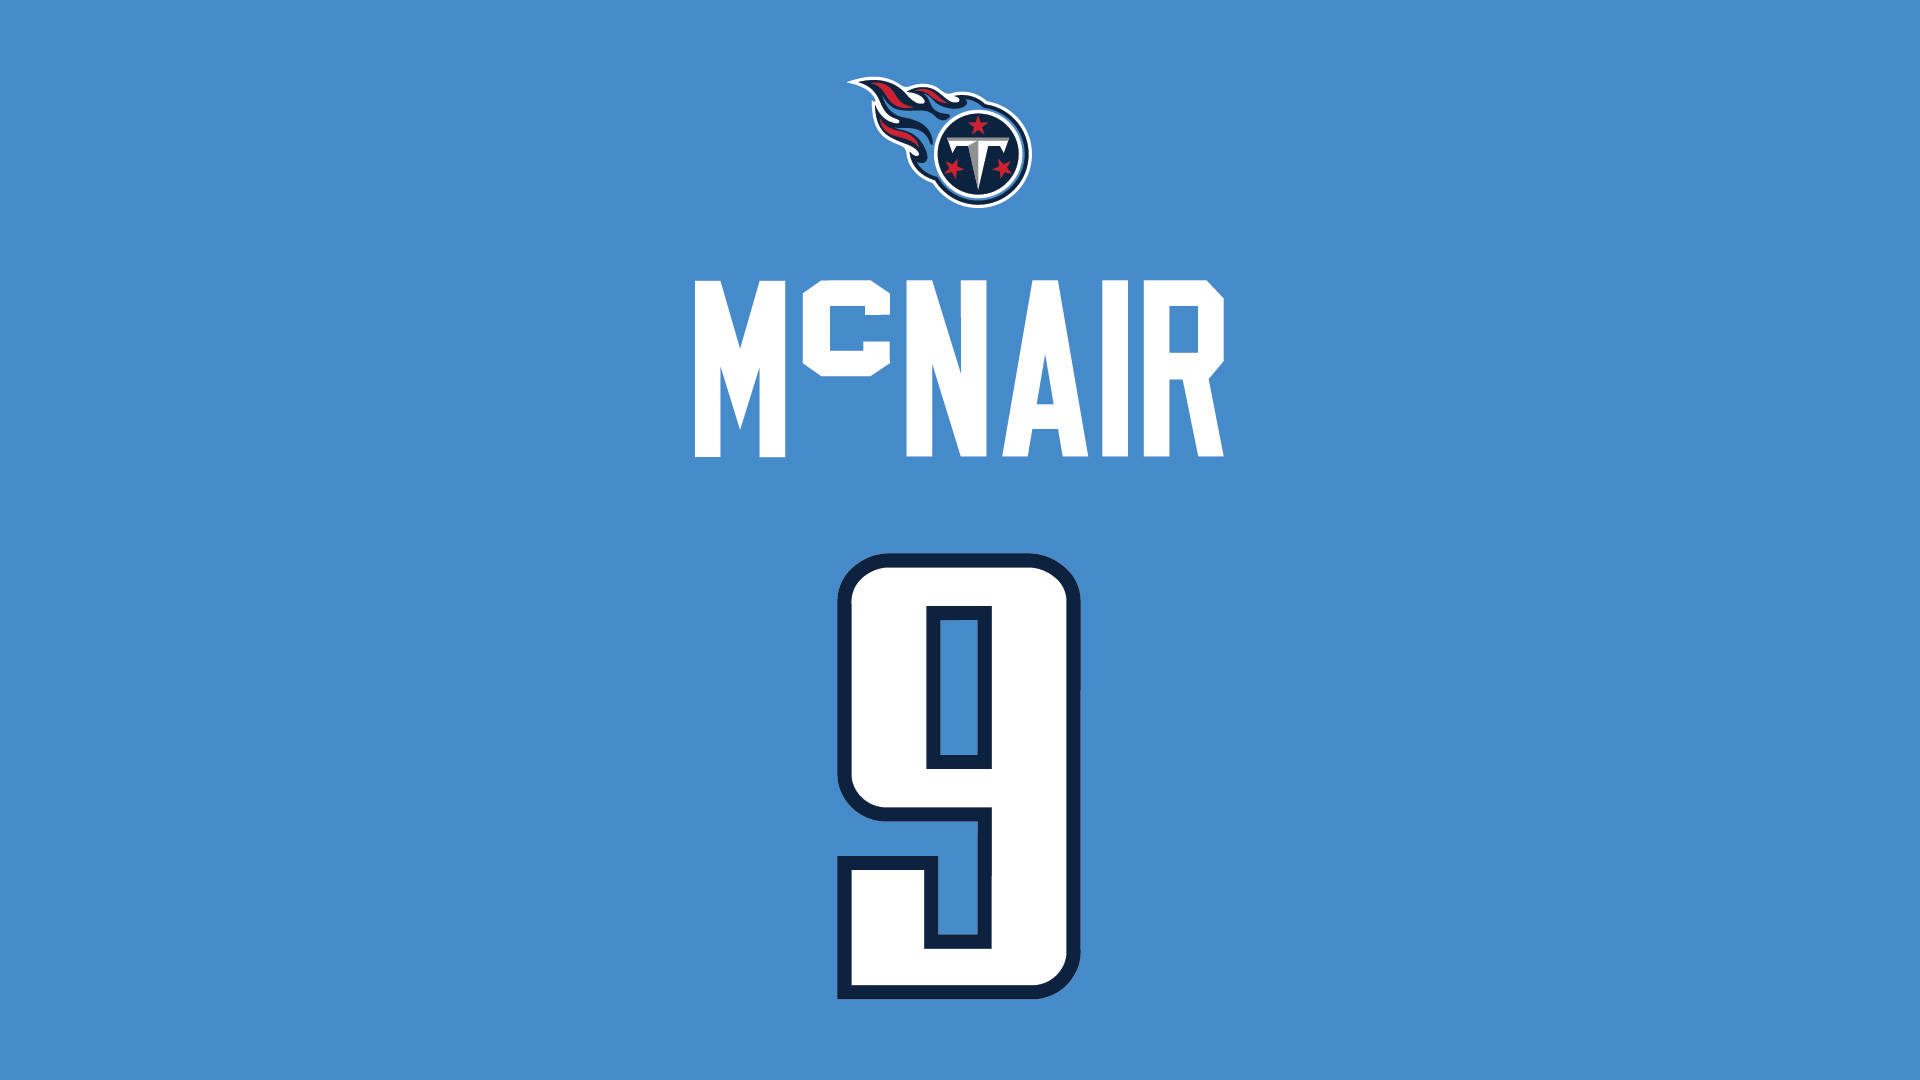 Tennessee Titans 1920X1080 Wallpaper and Background Image